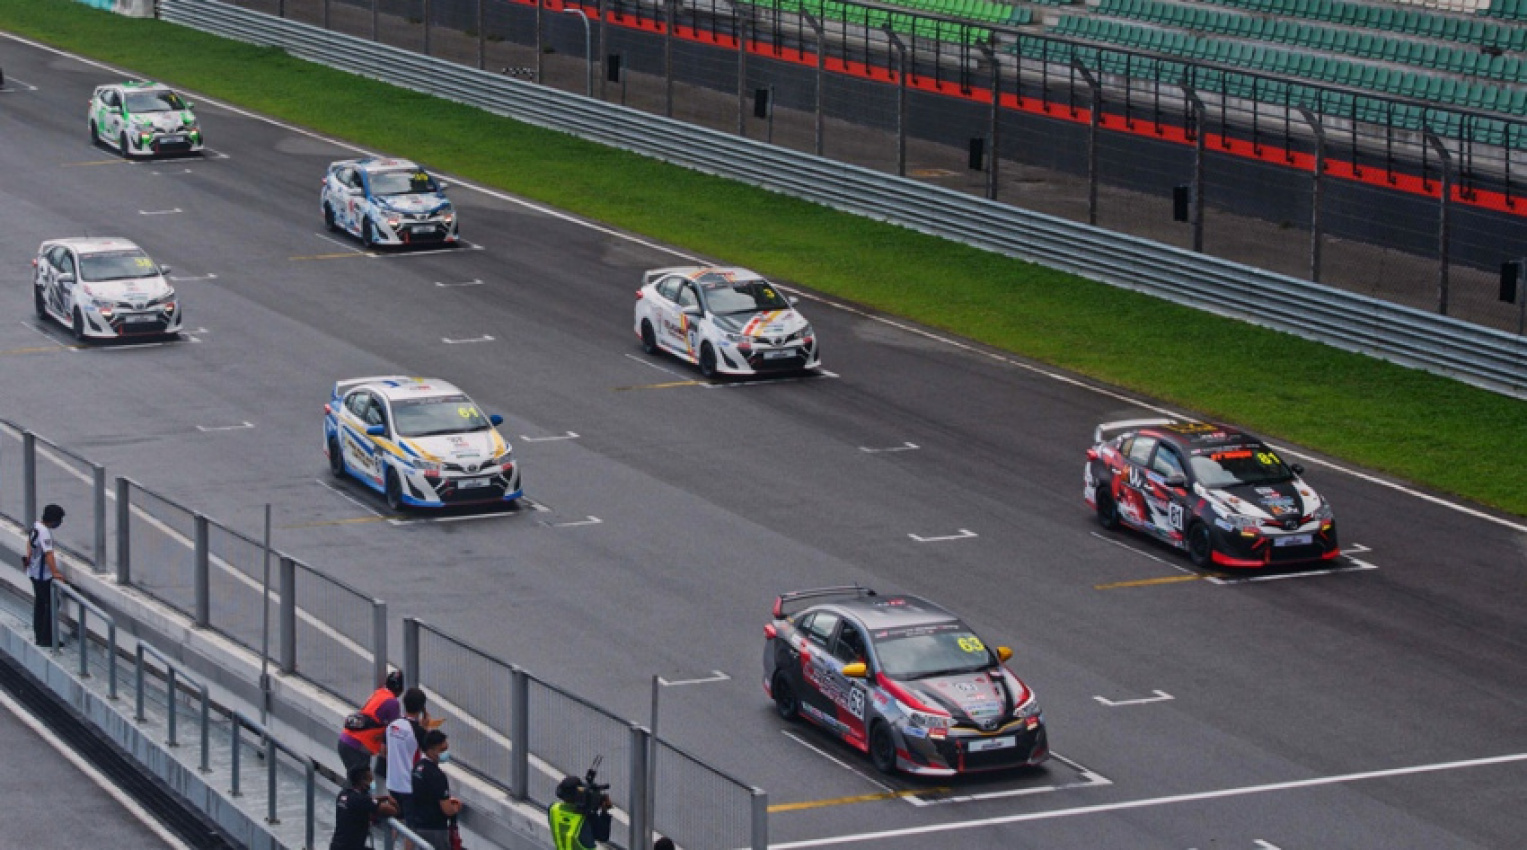 autos, cars, one-make race, sepang international circuit, tgr festival, toyota gazoo racing, toyota gr, umw toyota motor, vios challenge, round 2 of vios challenge to be broadcast live from sepang circuit this weekend